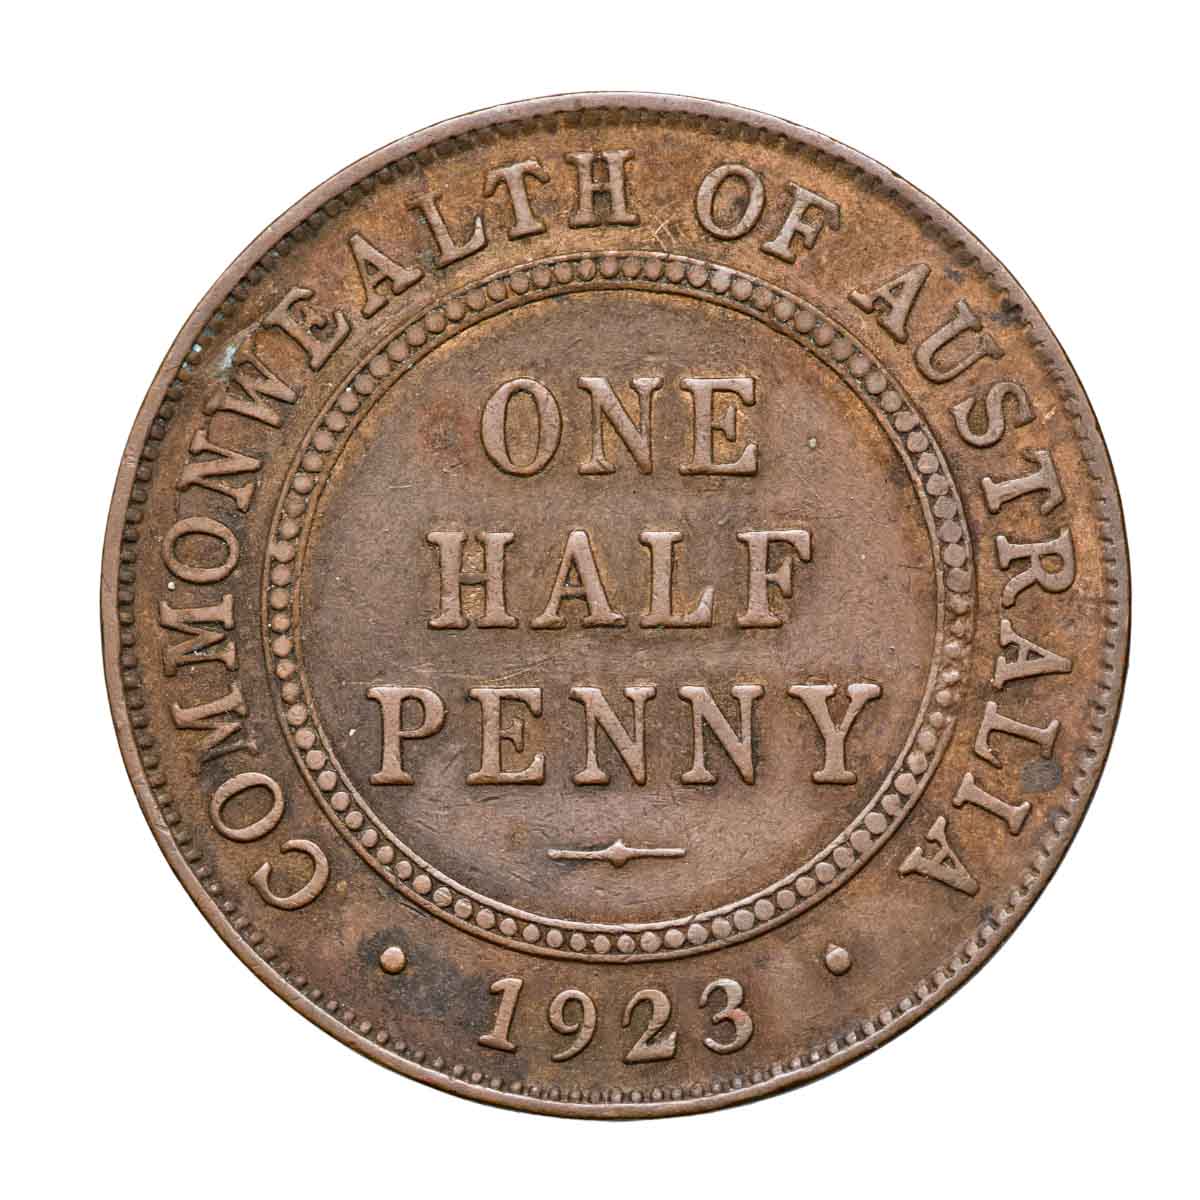 1923 Halfpenny about Very Fine